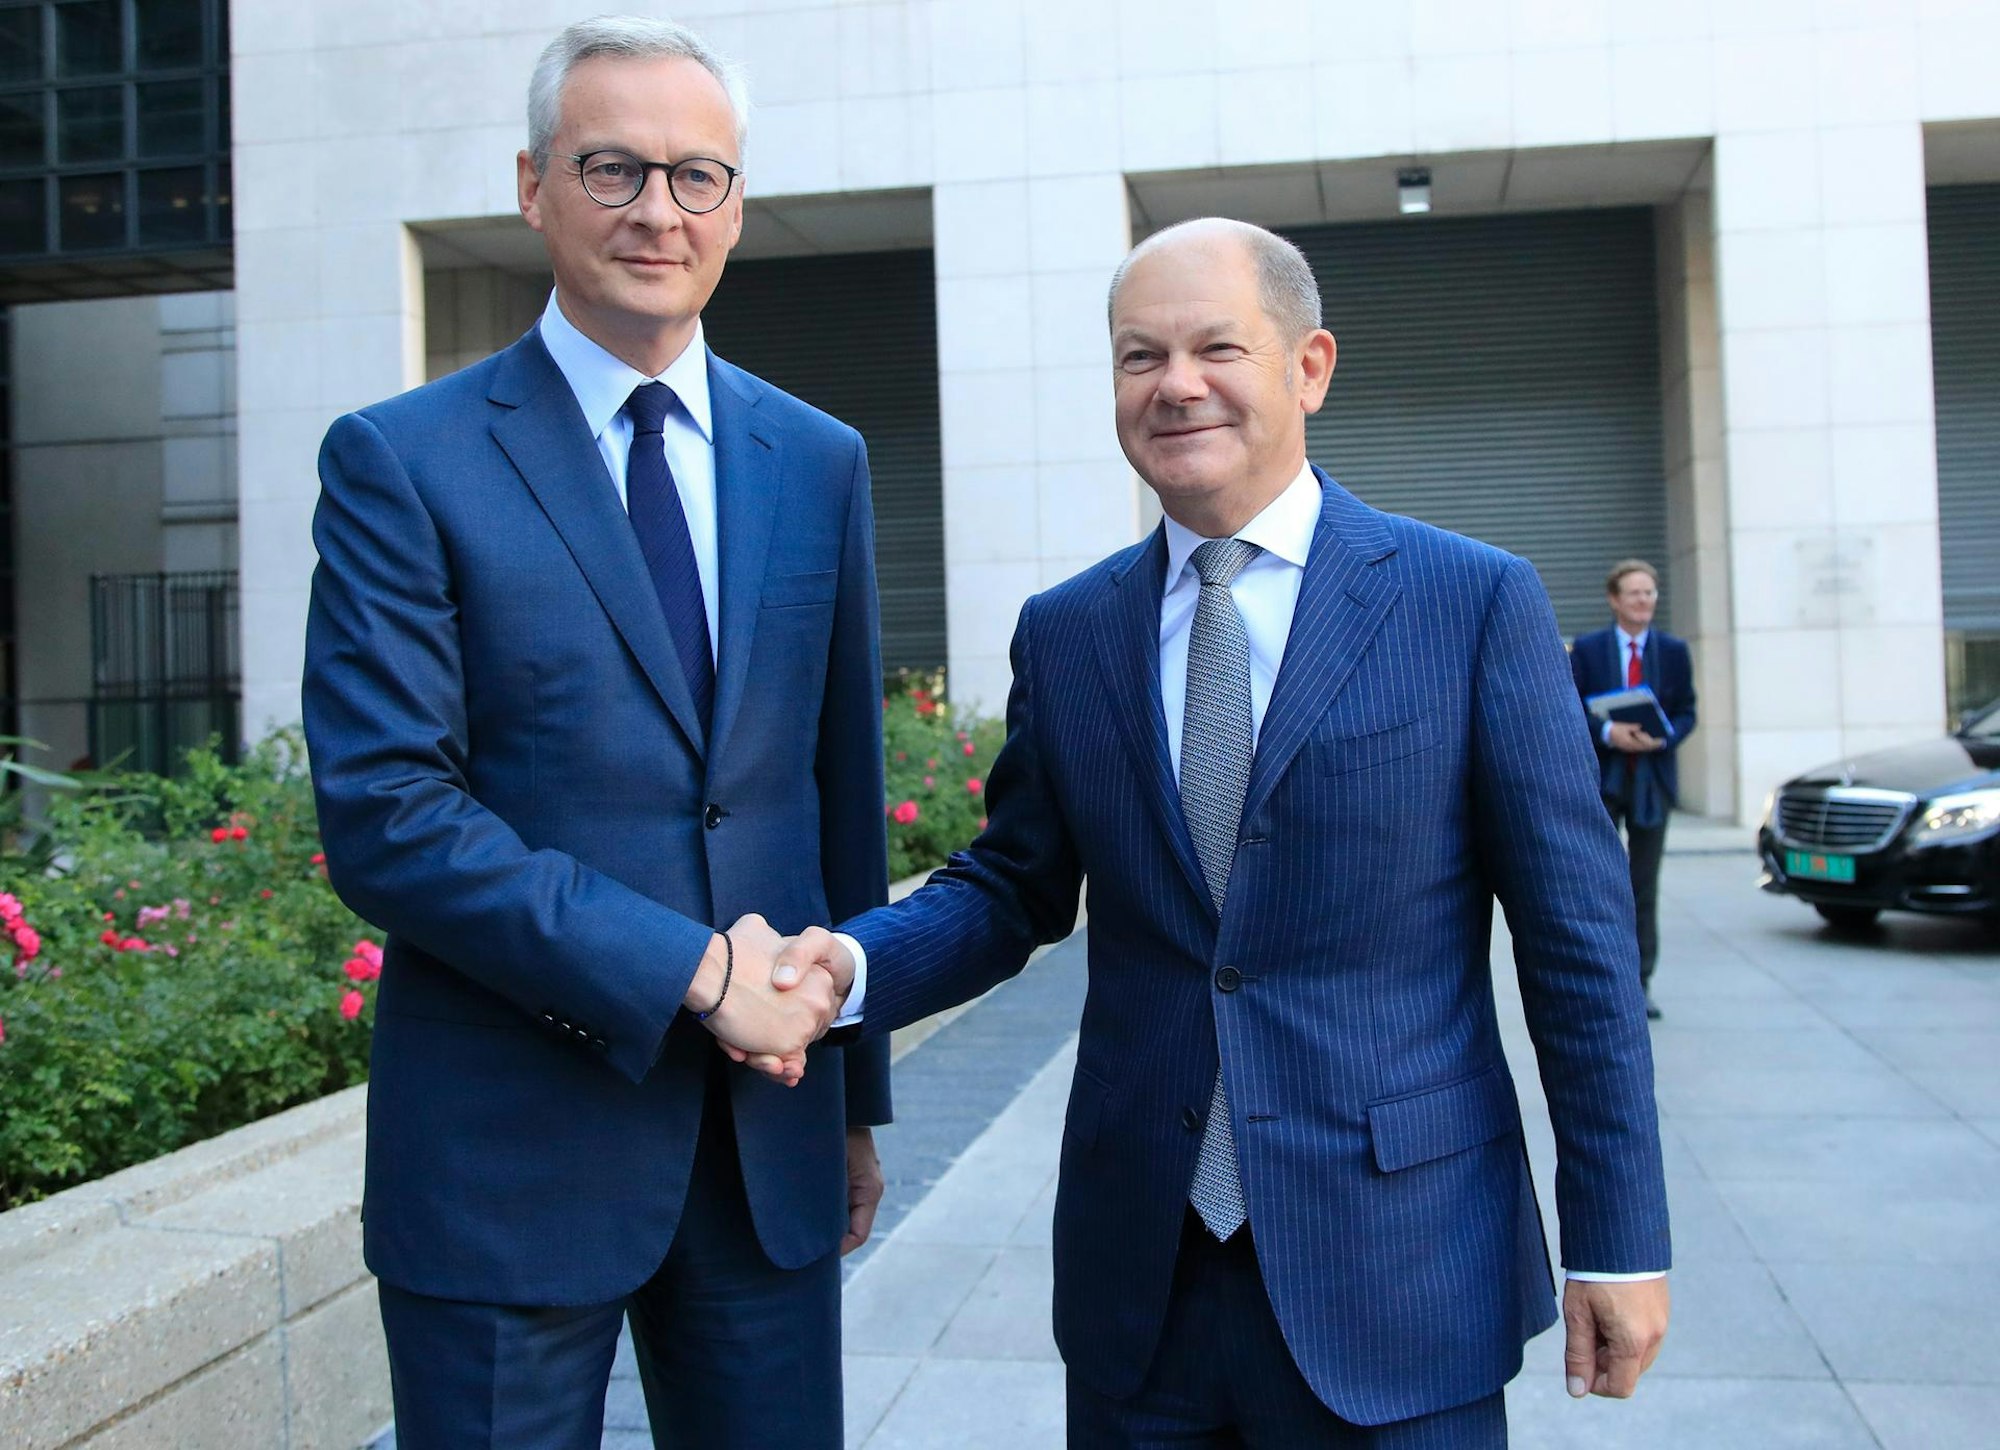 bruno le maire mit Olaf Scholz